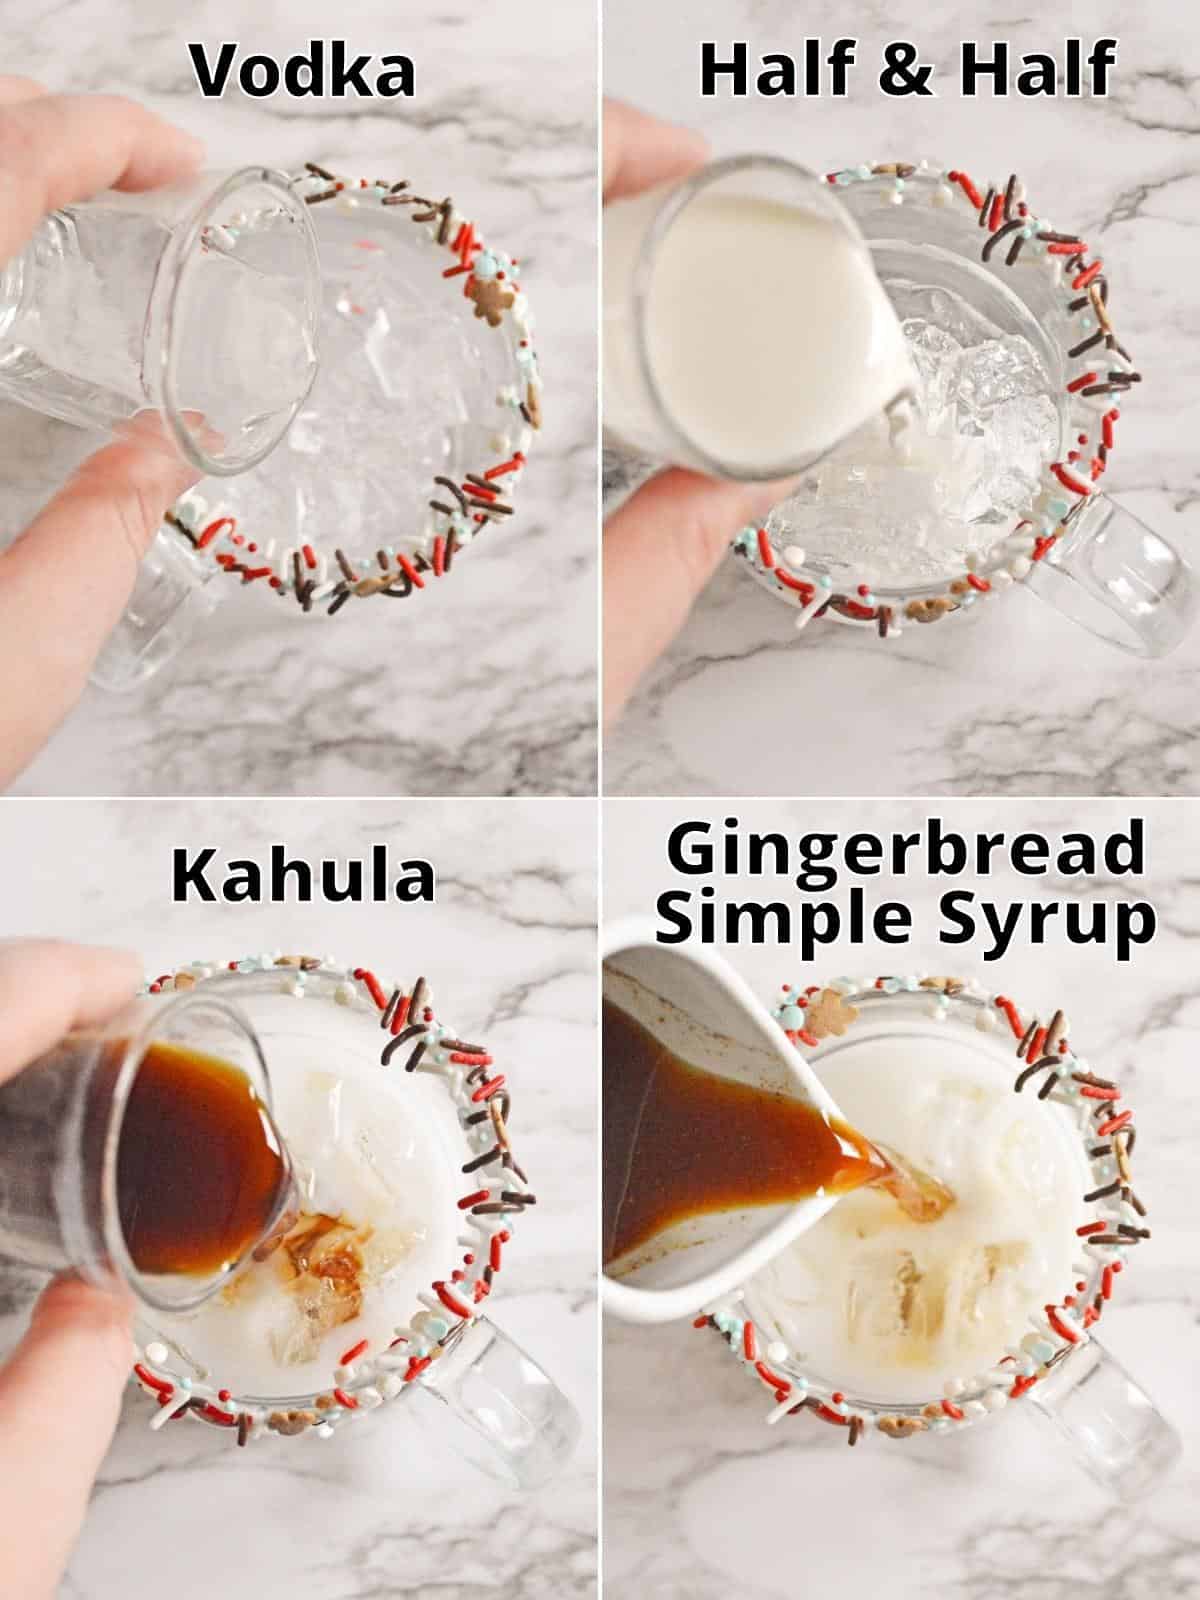 Four image collage of ingredients being added to sprinkle-rimmed glass mug. Top left, vodka. Top right, half and half, bottom left kahlua, bottom right: gingerbread simple syrup.